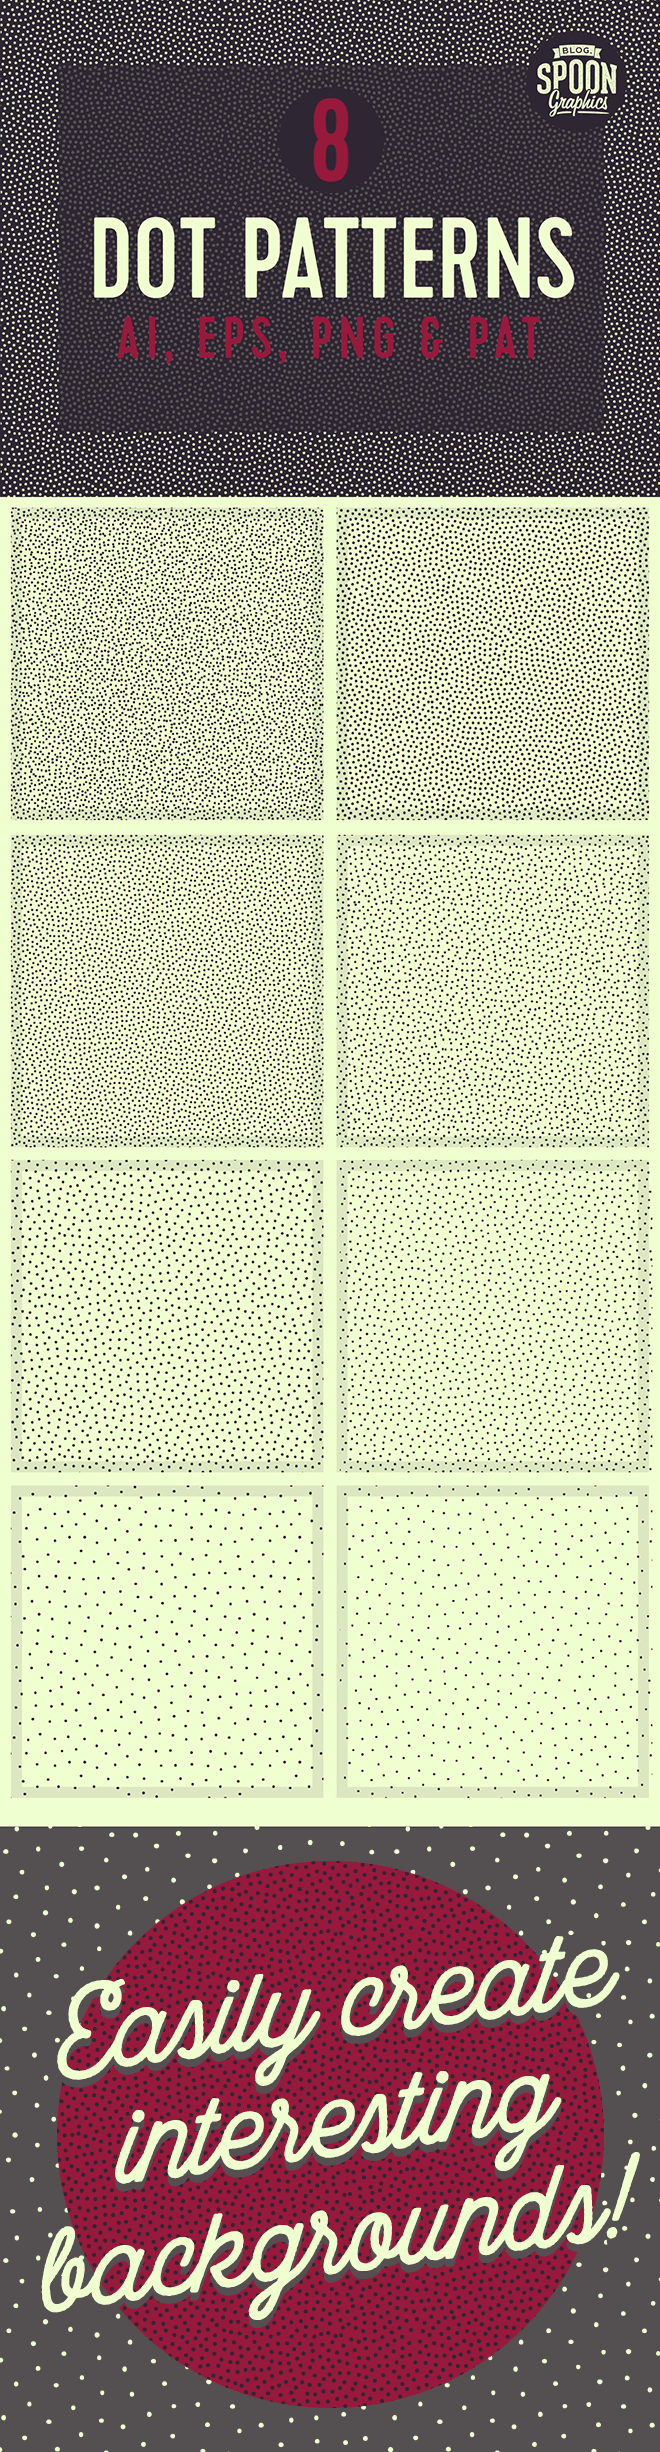 8 Free Seamless Dot Patterns in Vector, PNG & PAT Formats